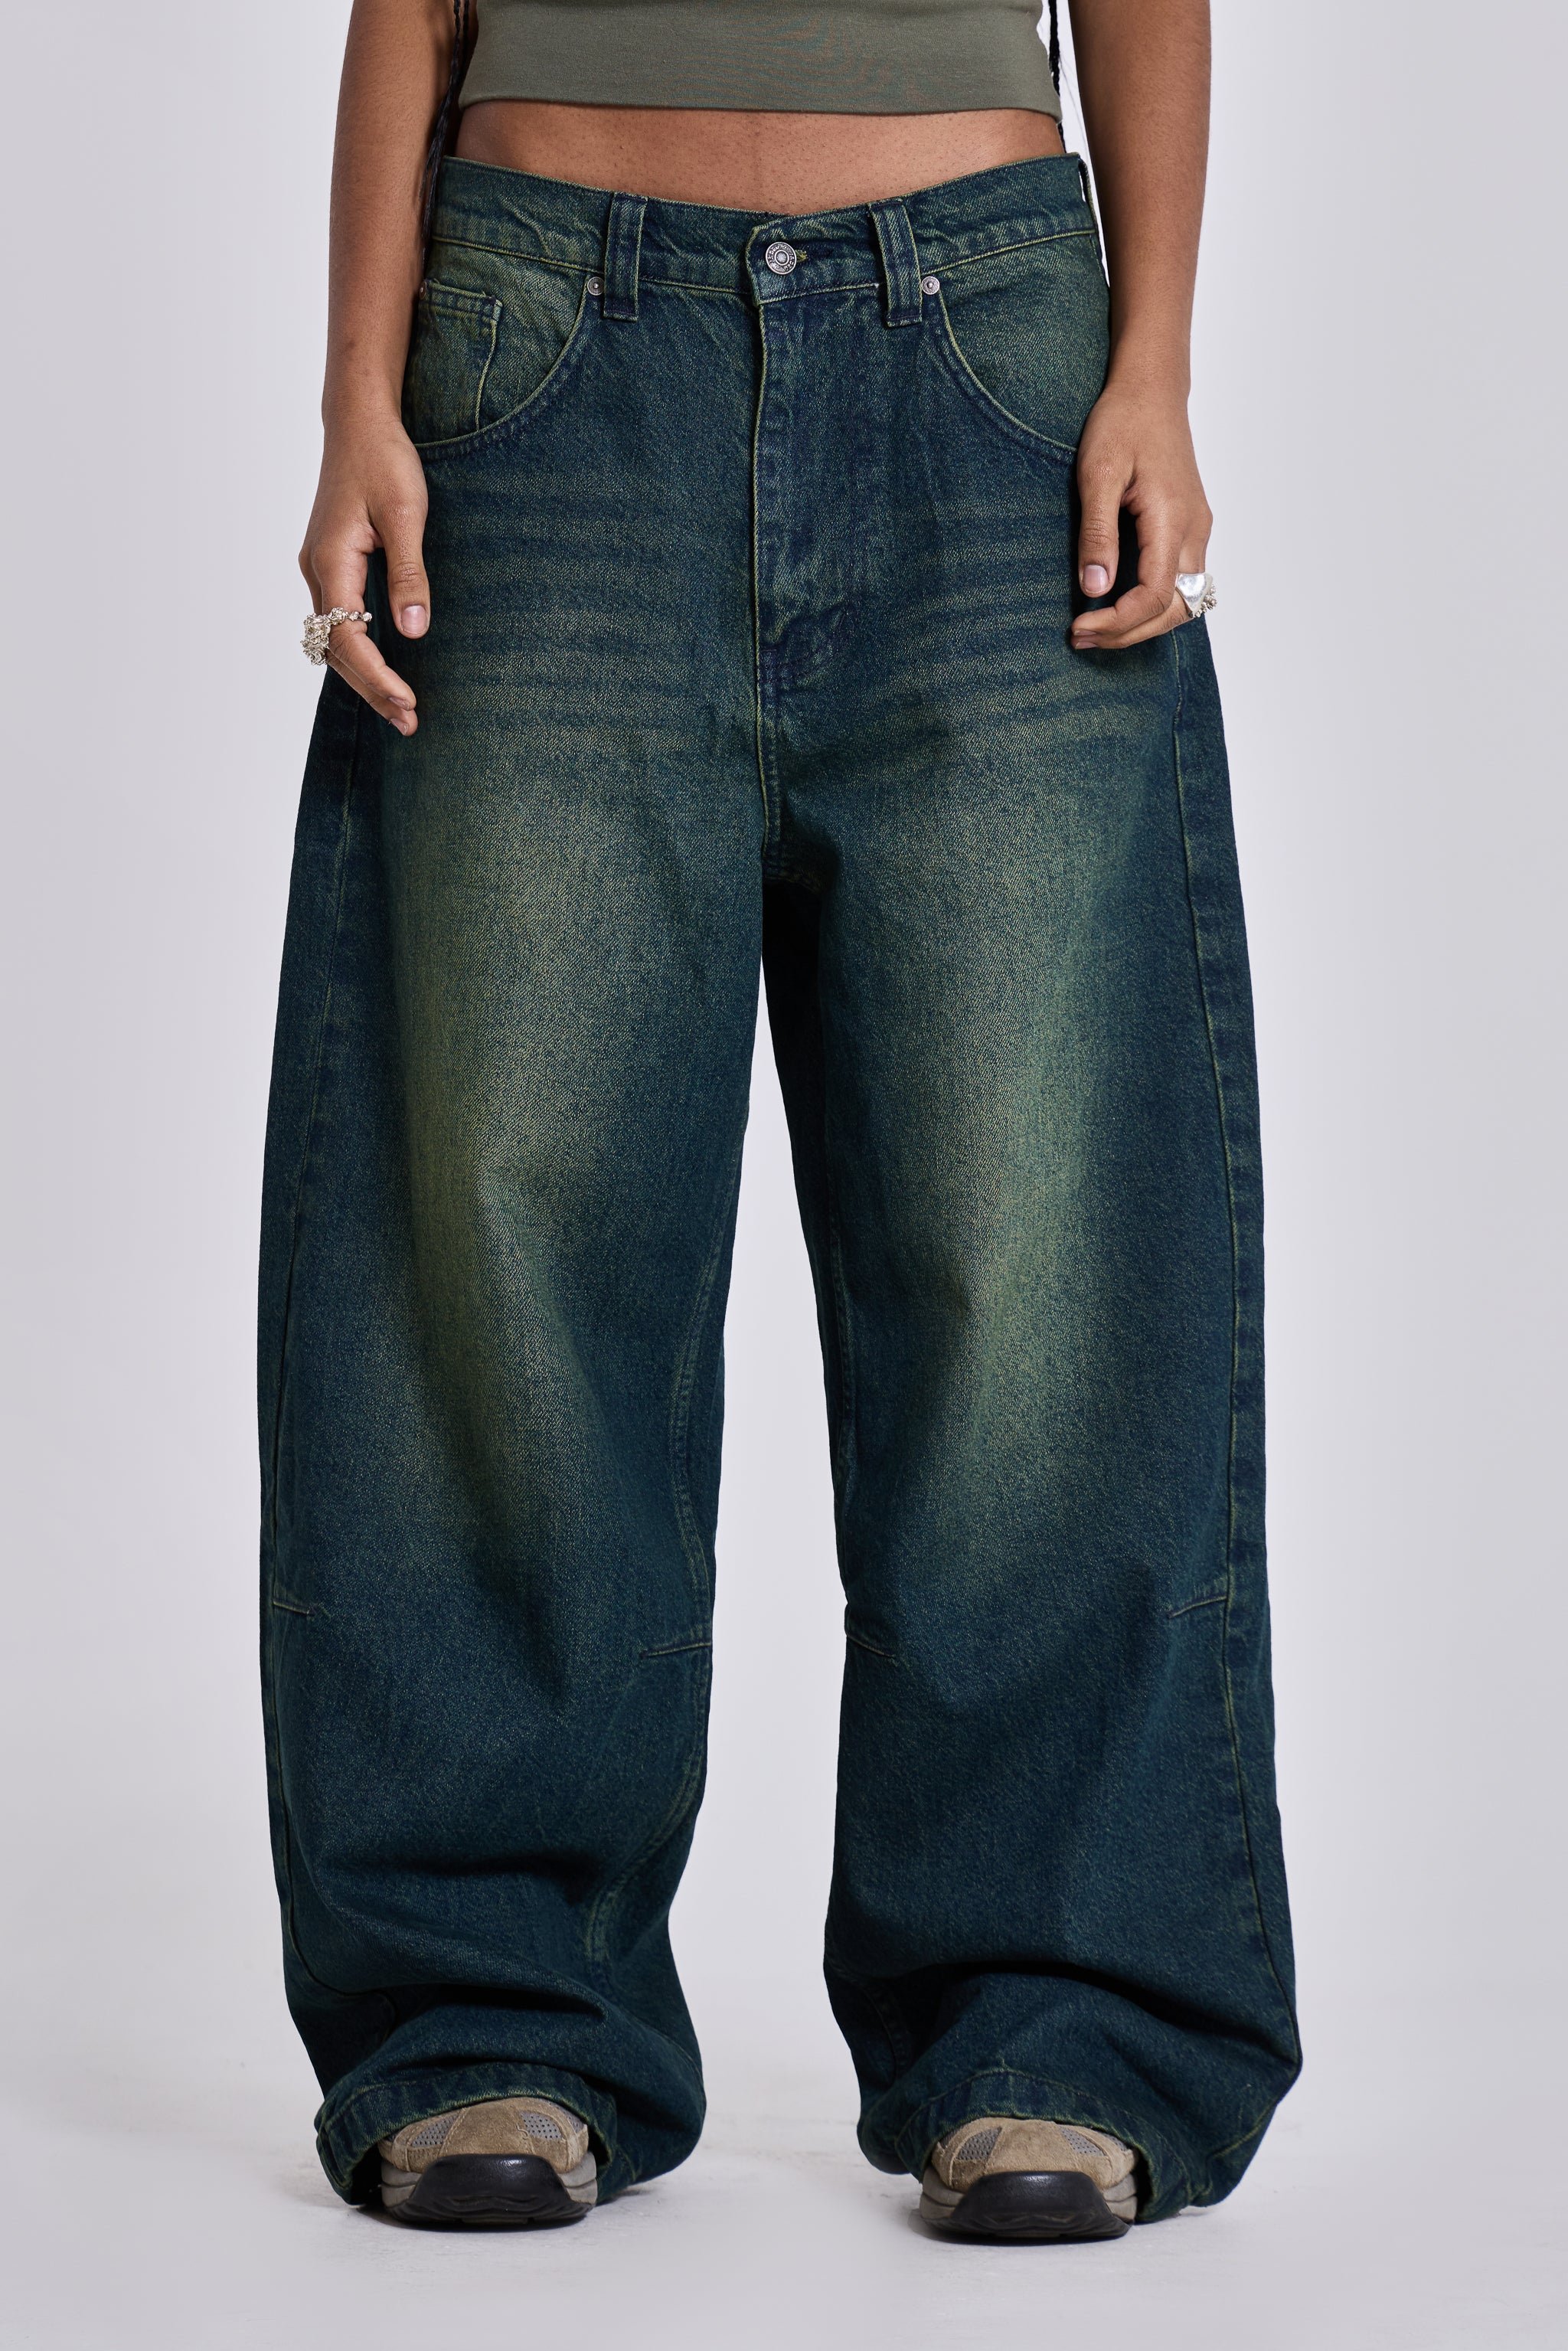 [jaded london] blue wash colossus jeansアワーレガシー